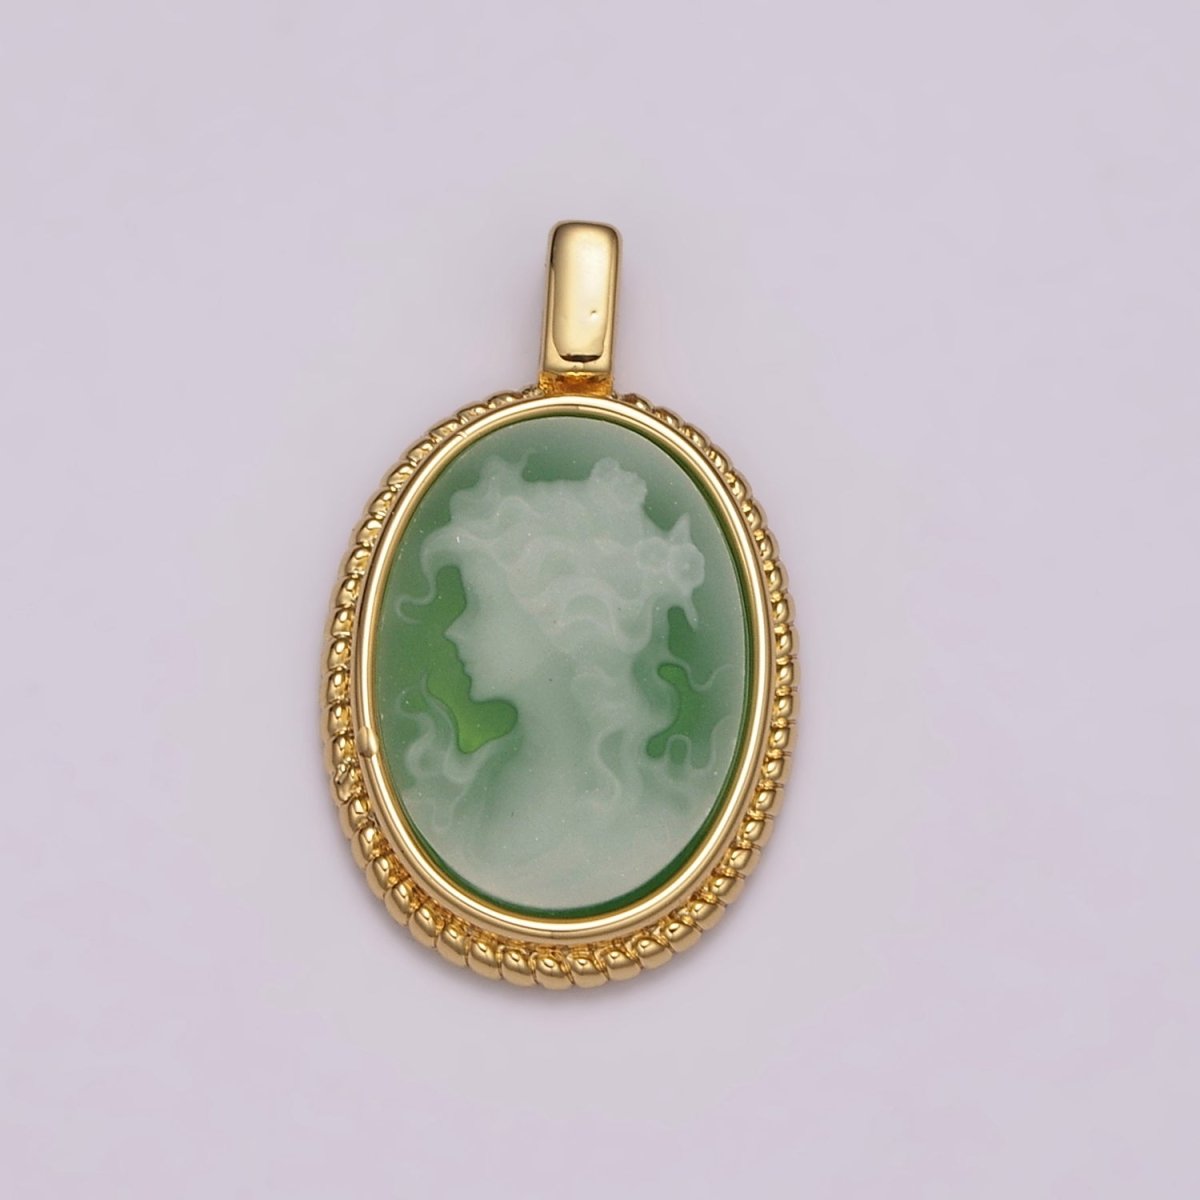 The Agate Cameo Pendant Green Agate Victorian Oval Jewelry Inspired for Necklace Medallion N-483 - DLUXCA